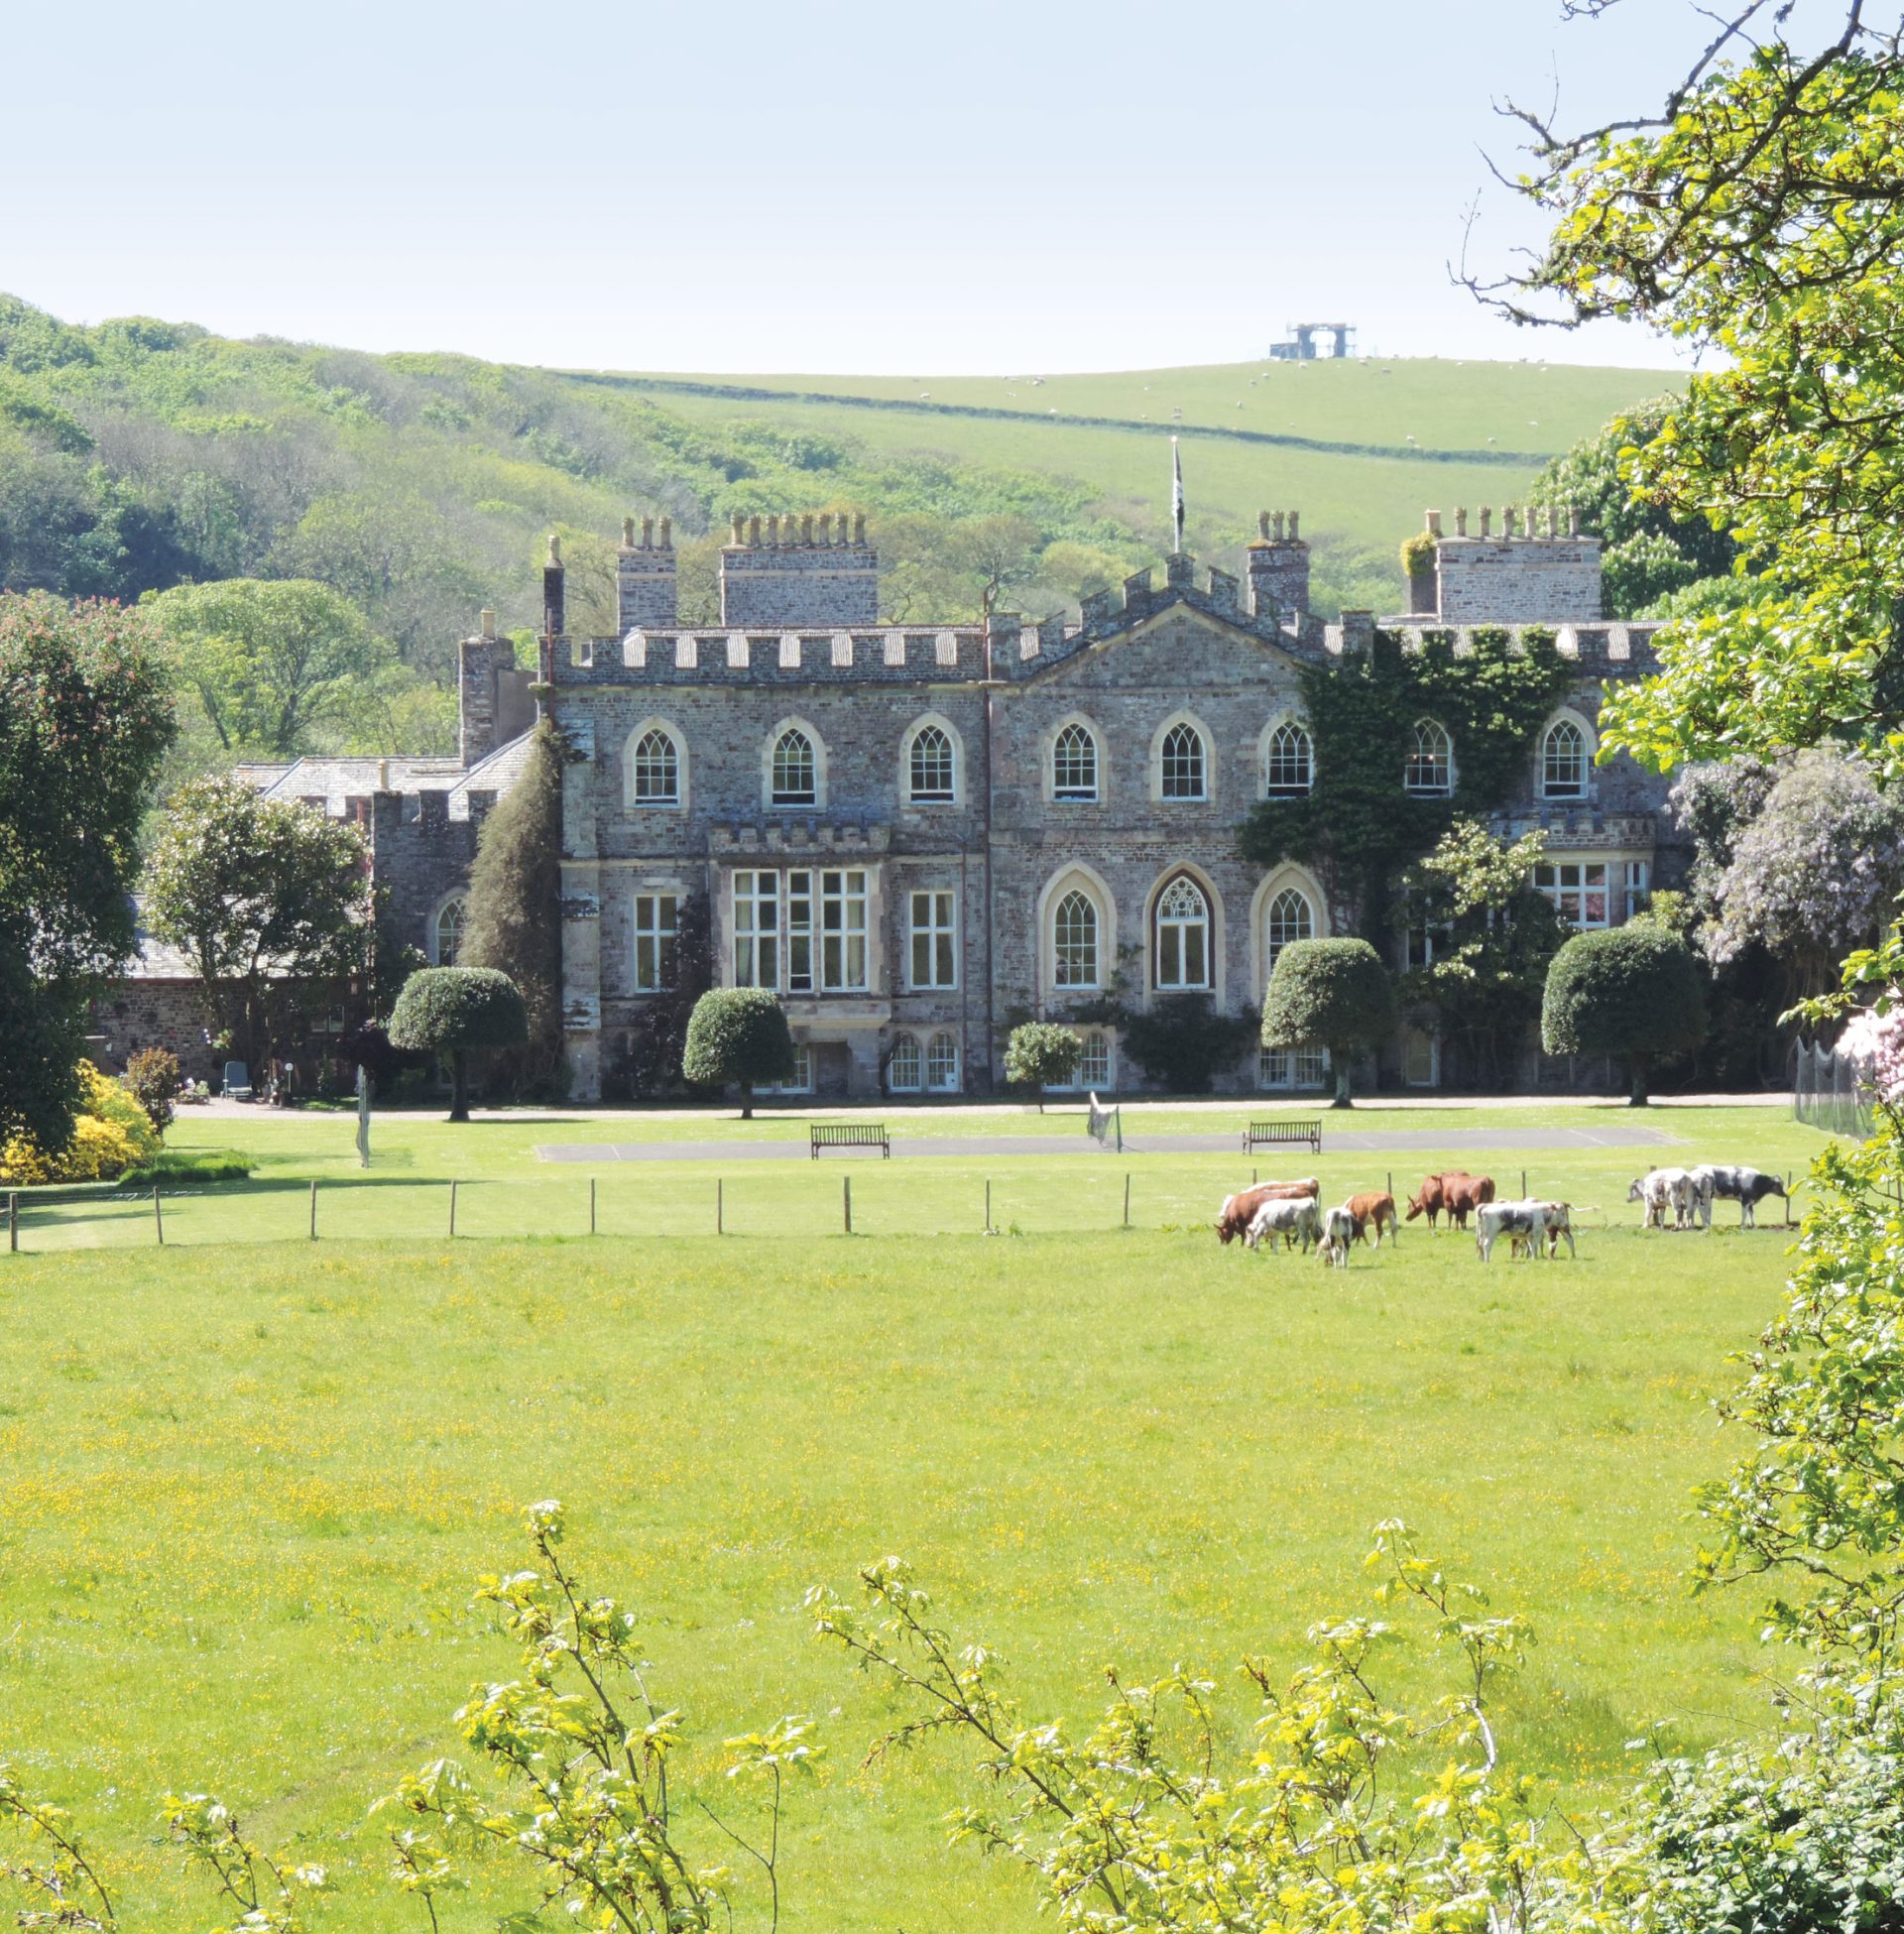 Cows grazing in the field in front of Hartland Abbey on a summer day